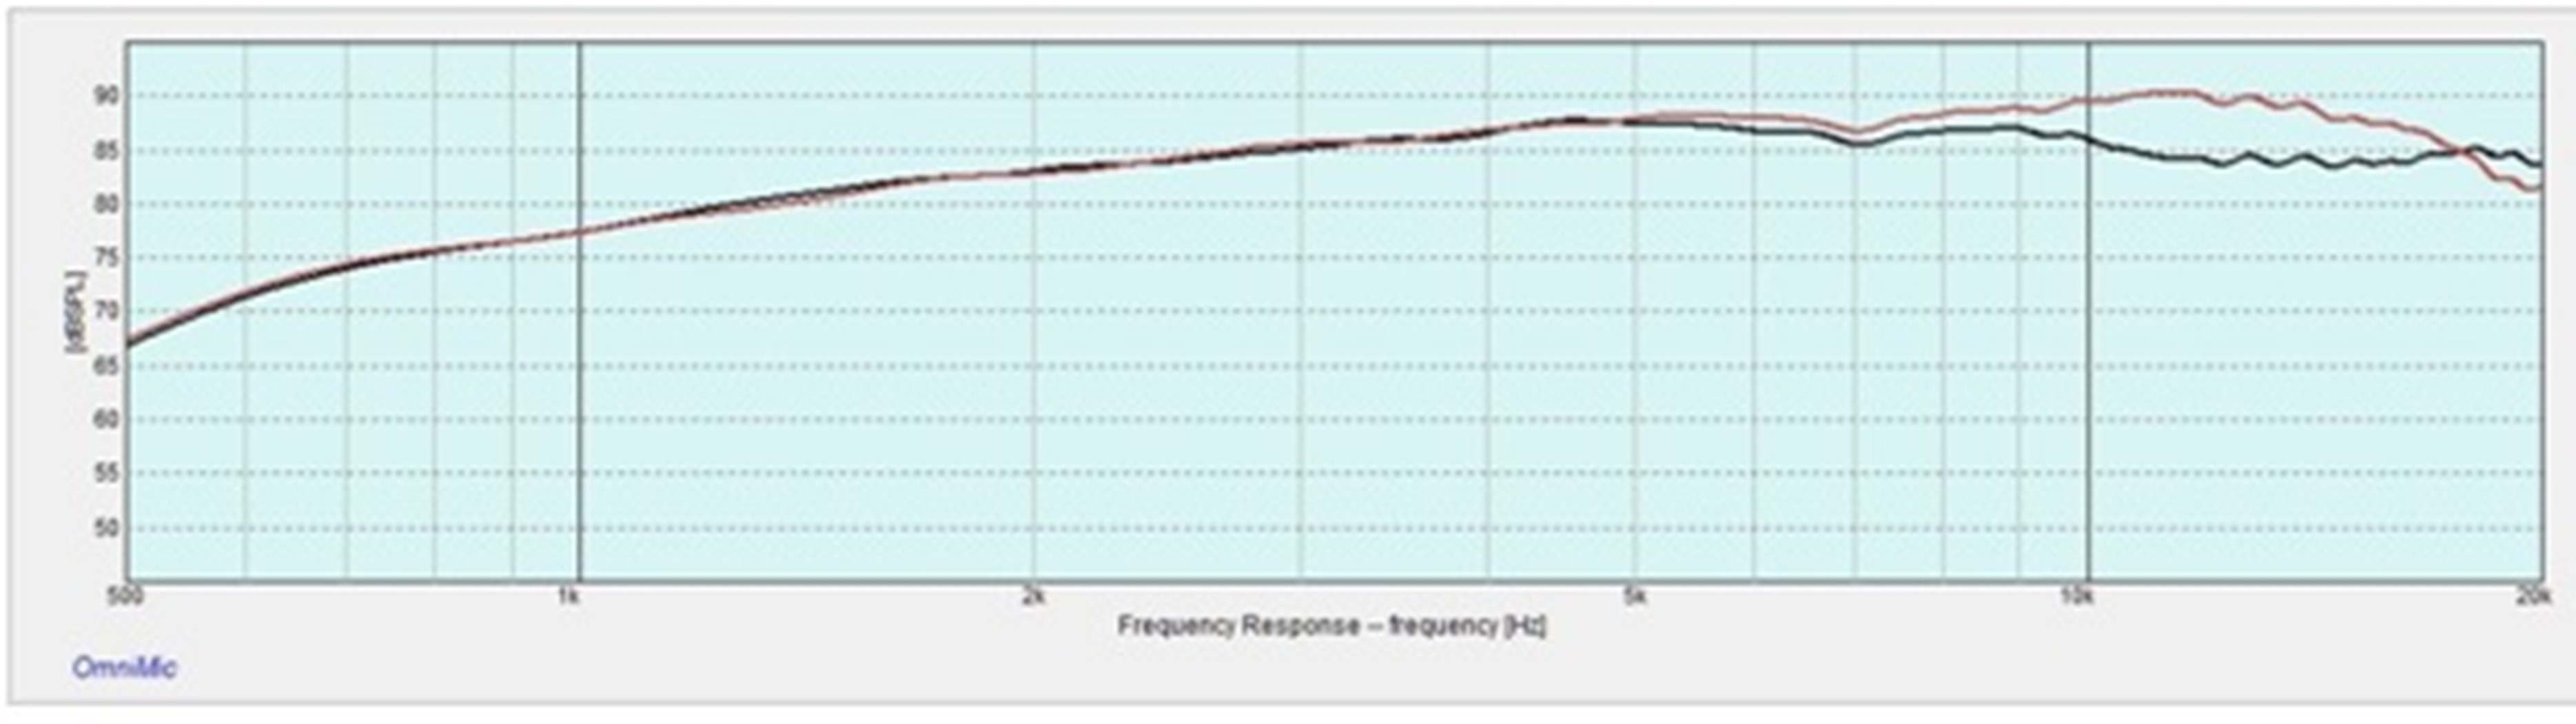 Frequency Response1